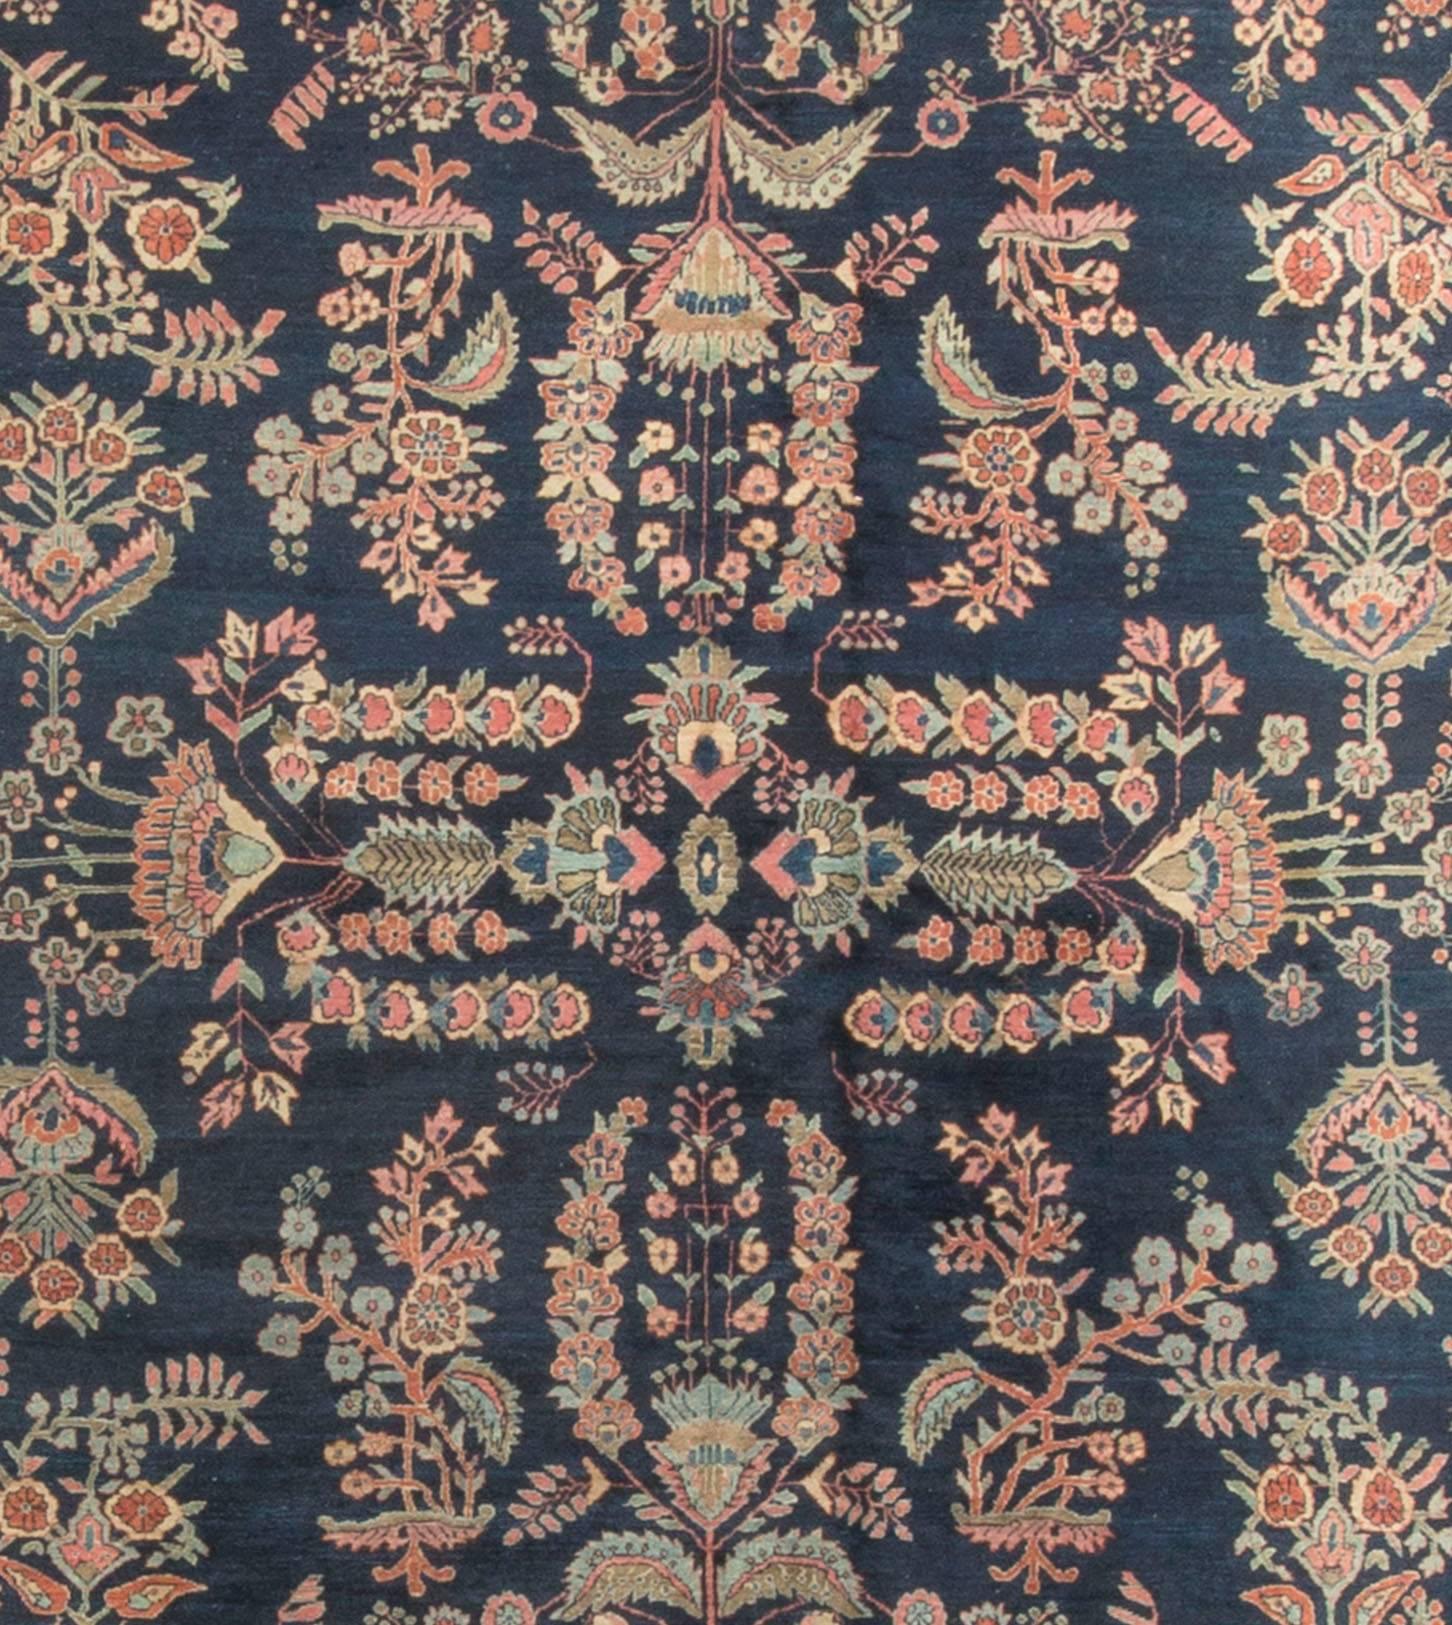 Antique Persian Sarouk rug. Measures: 9' x 12'10. Sarouk rugs are from the village of Saruk about 25 miles north of Arak, in west Persia. Sarouk rugs have been produced for much of the last century. Sarouk’s are normally a very thick and dense heavy